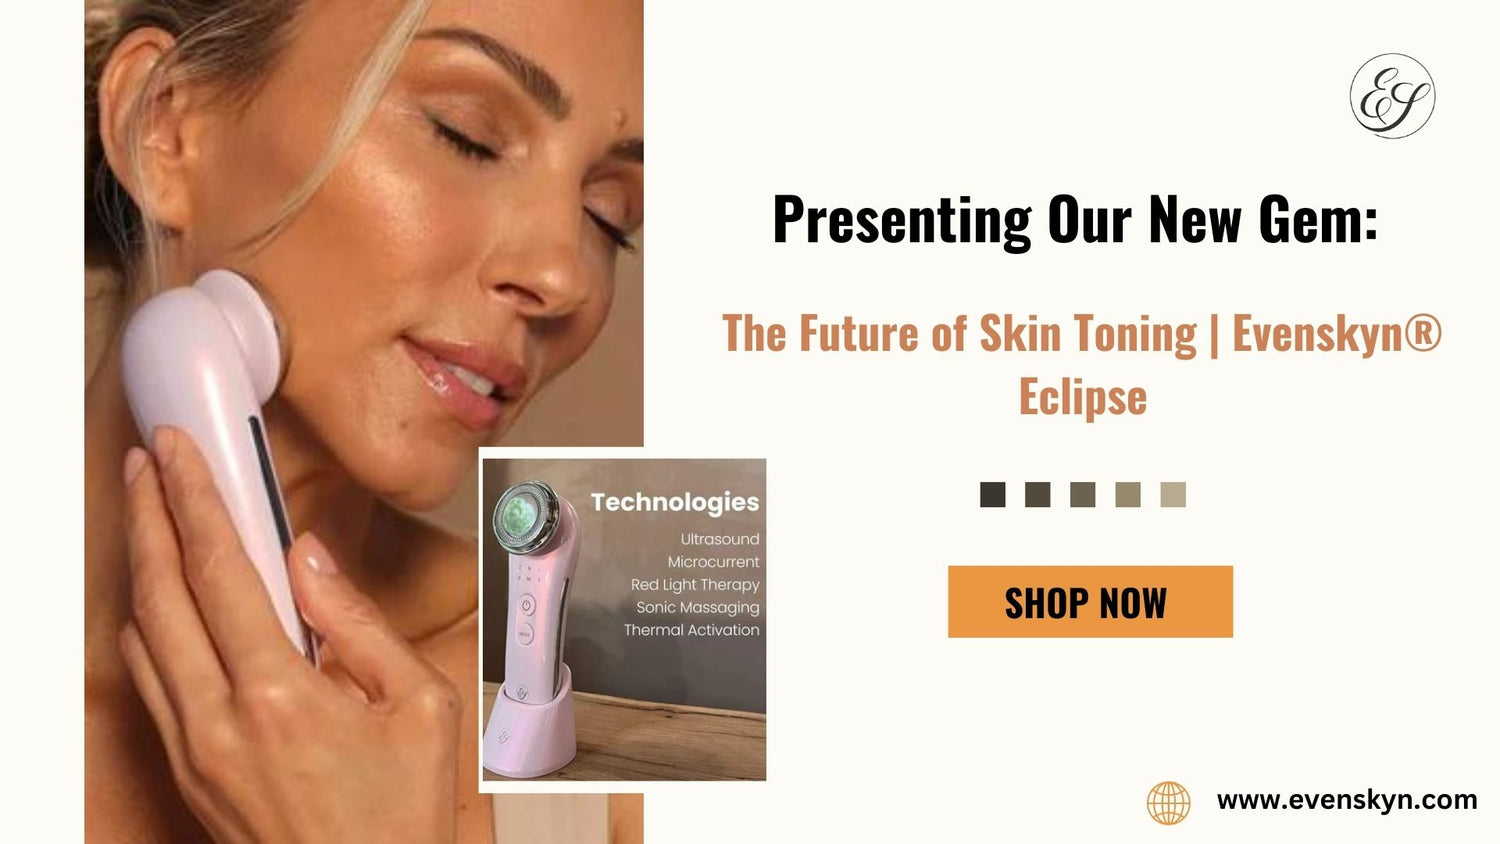  The Future of Skin Toning  Evenskyn® Eclipse